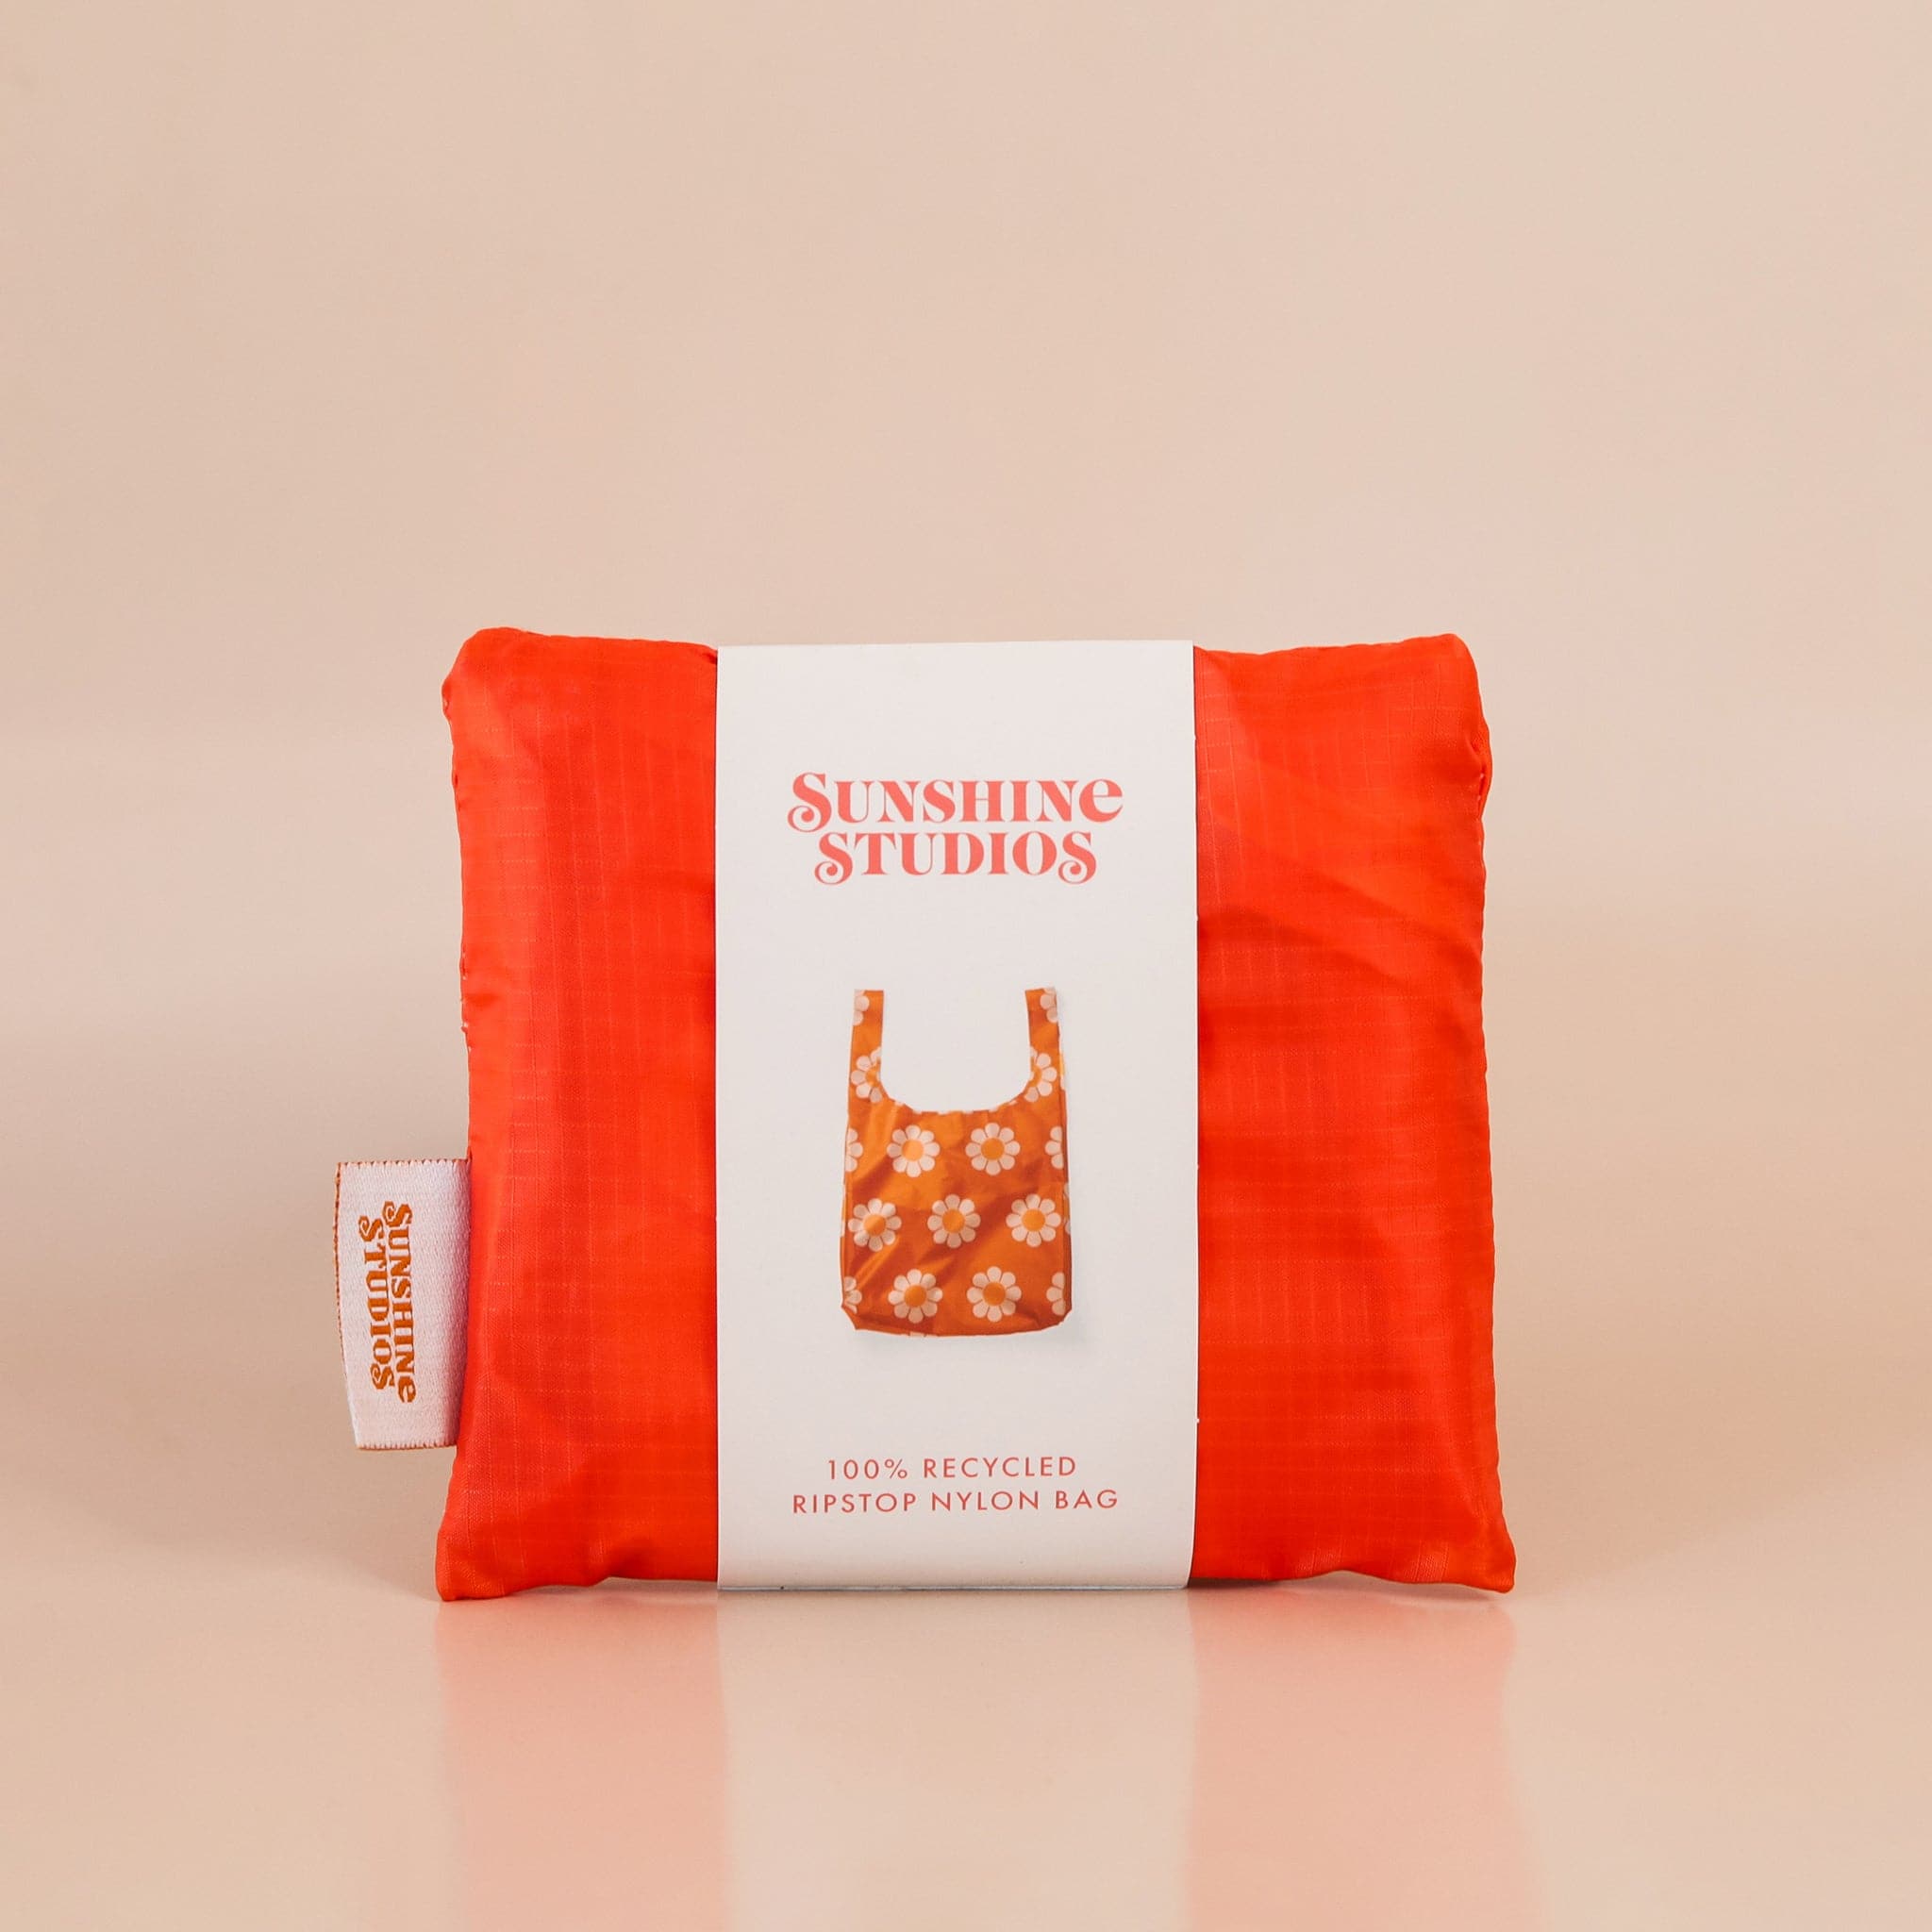 Folded up red-orange reusable bag folded into a small square within white wrap around packaging that reads 'sunshine studios'. The label has a photo of the bag unfolded and reads '100% recycled ripstop nylon bag'